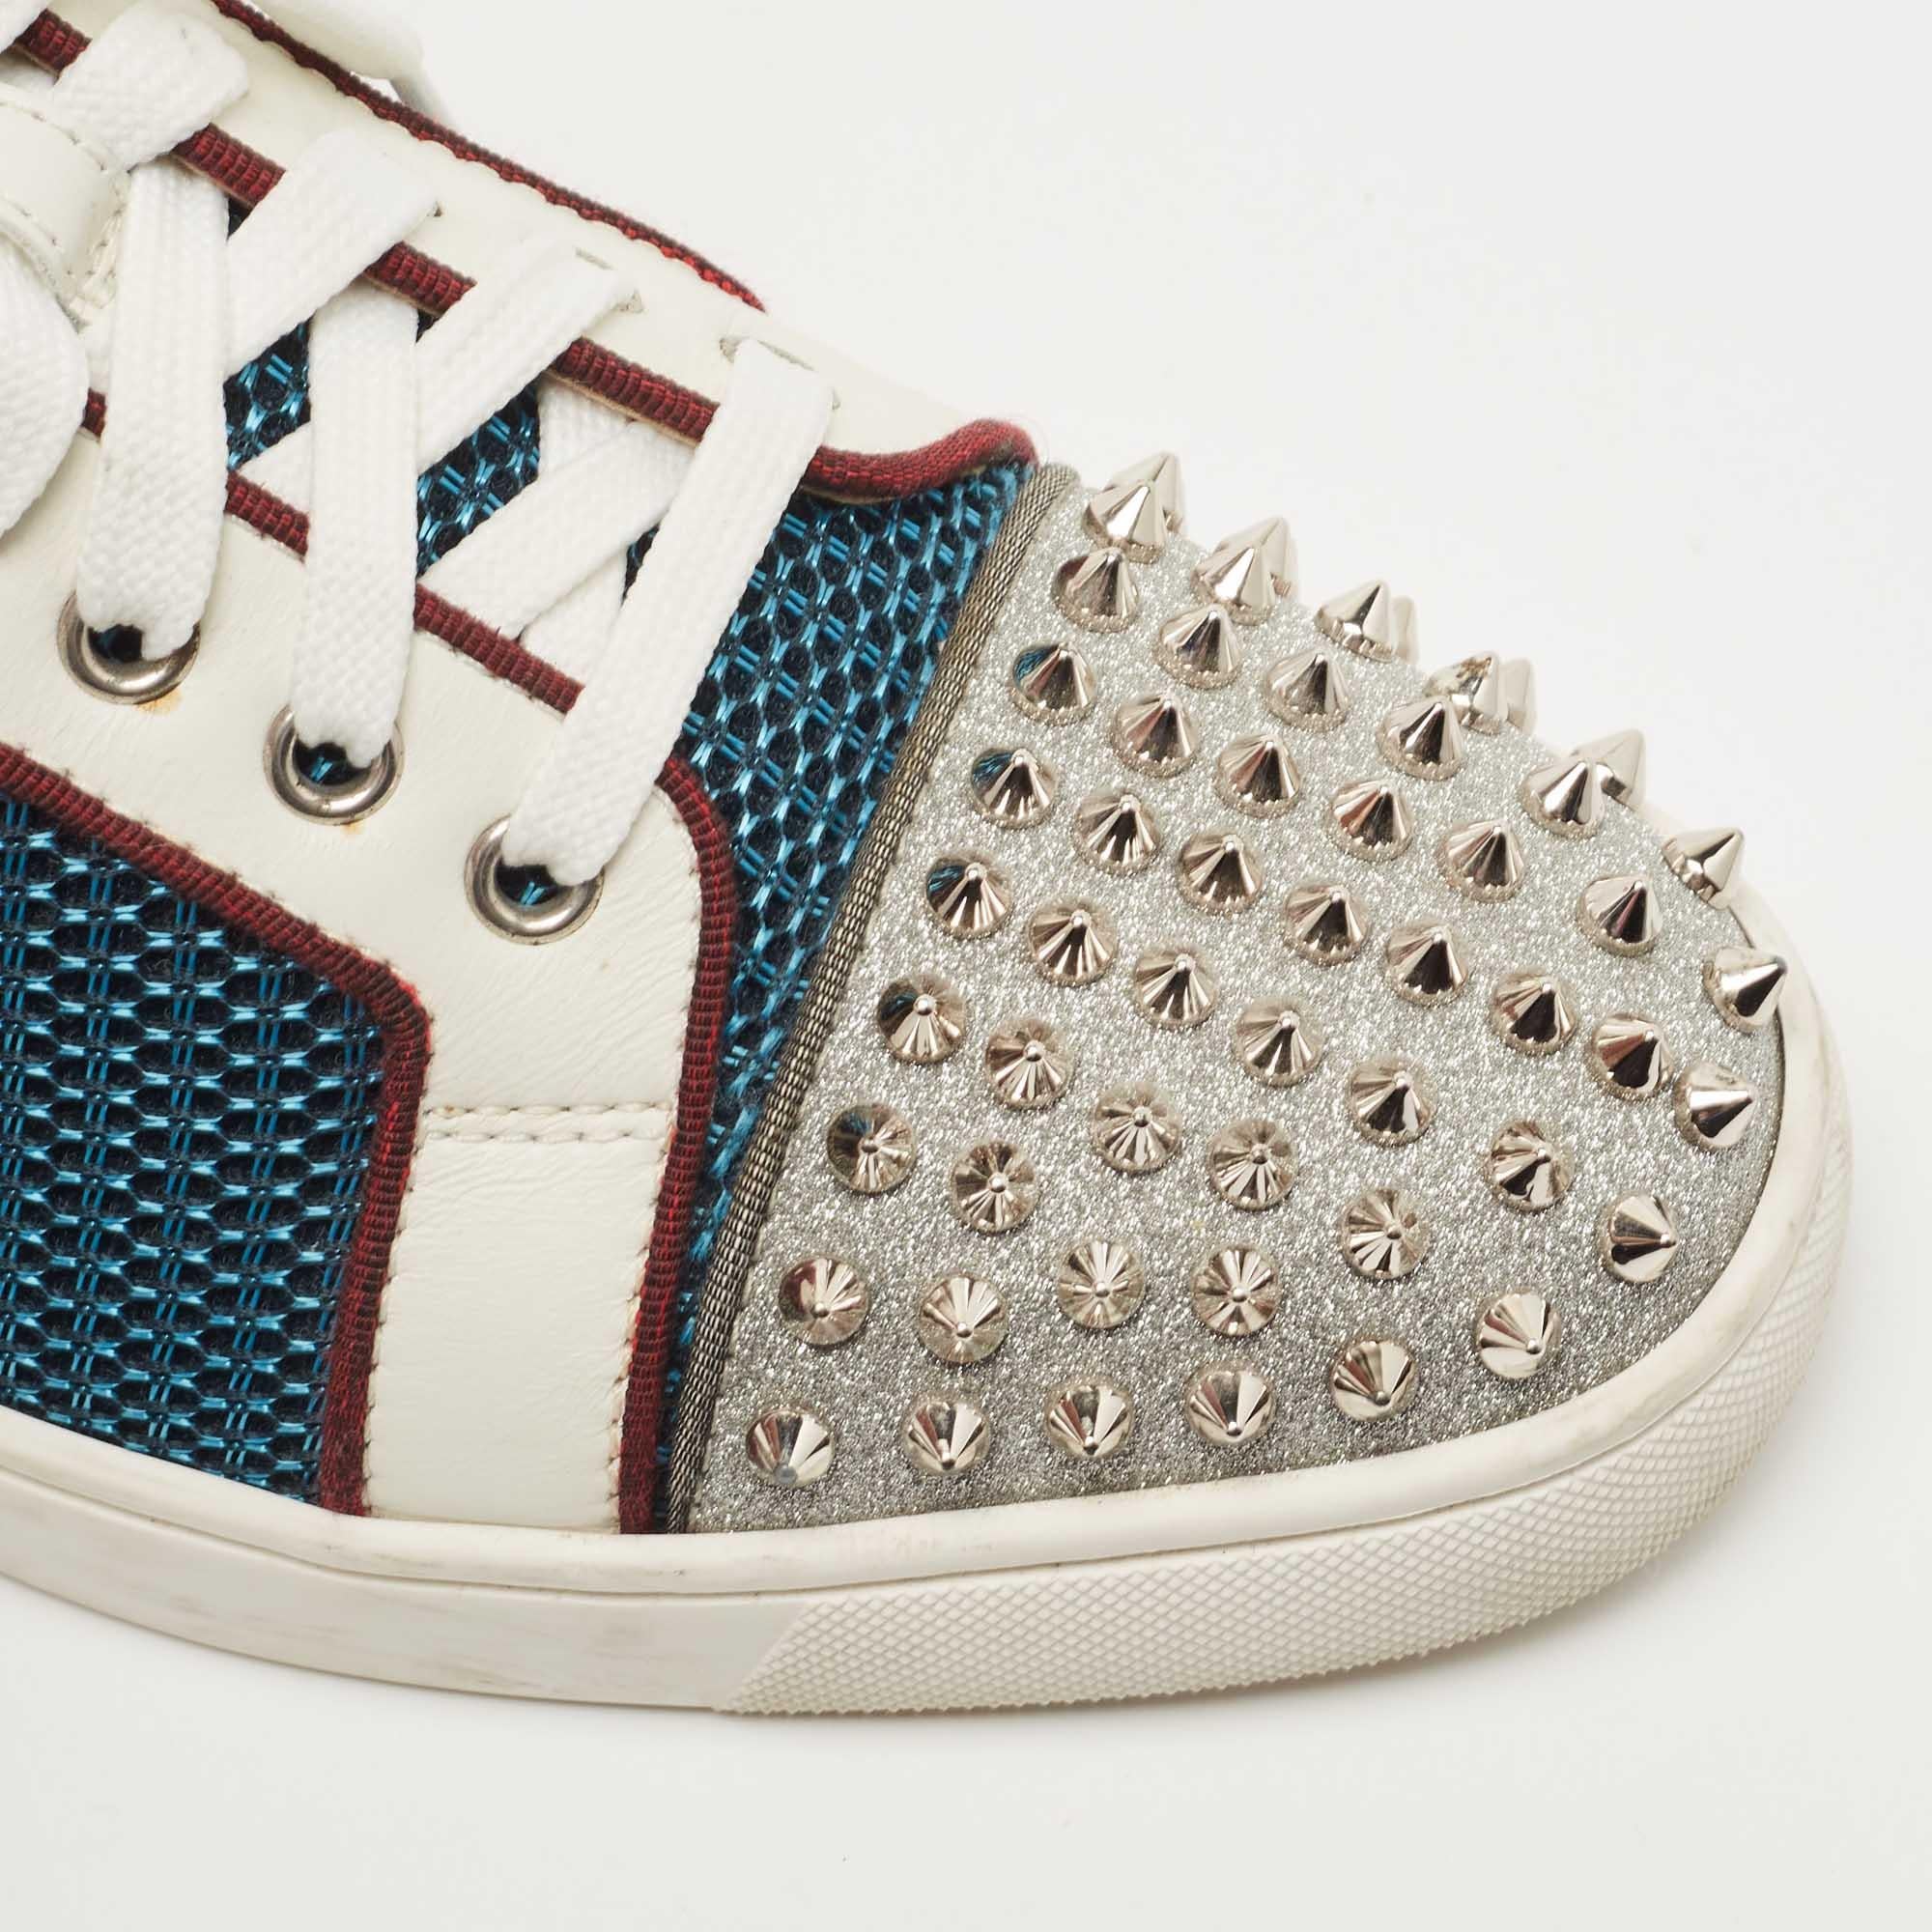 Christian Louboutin Multicolor Leather and Mesh Louis Junior Spikes Sneakers Siz 3